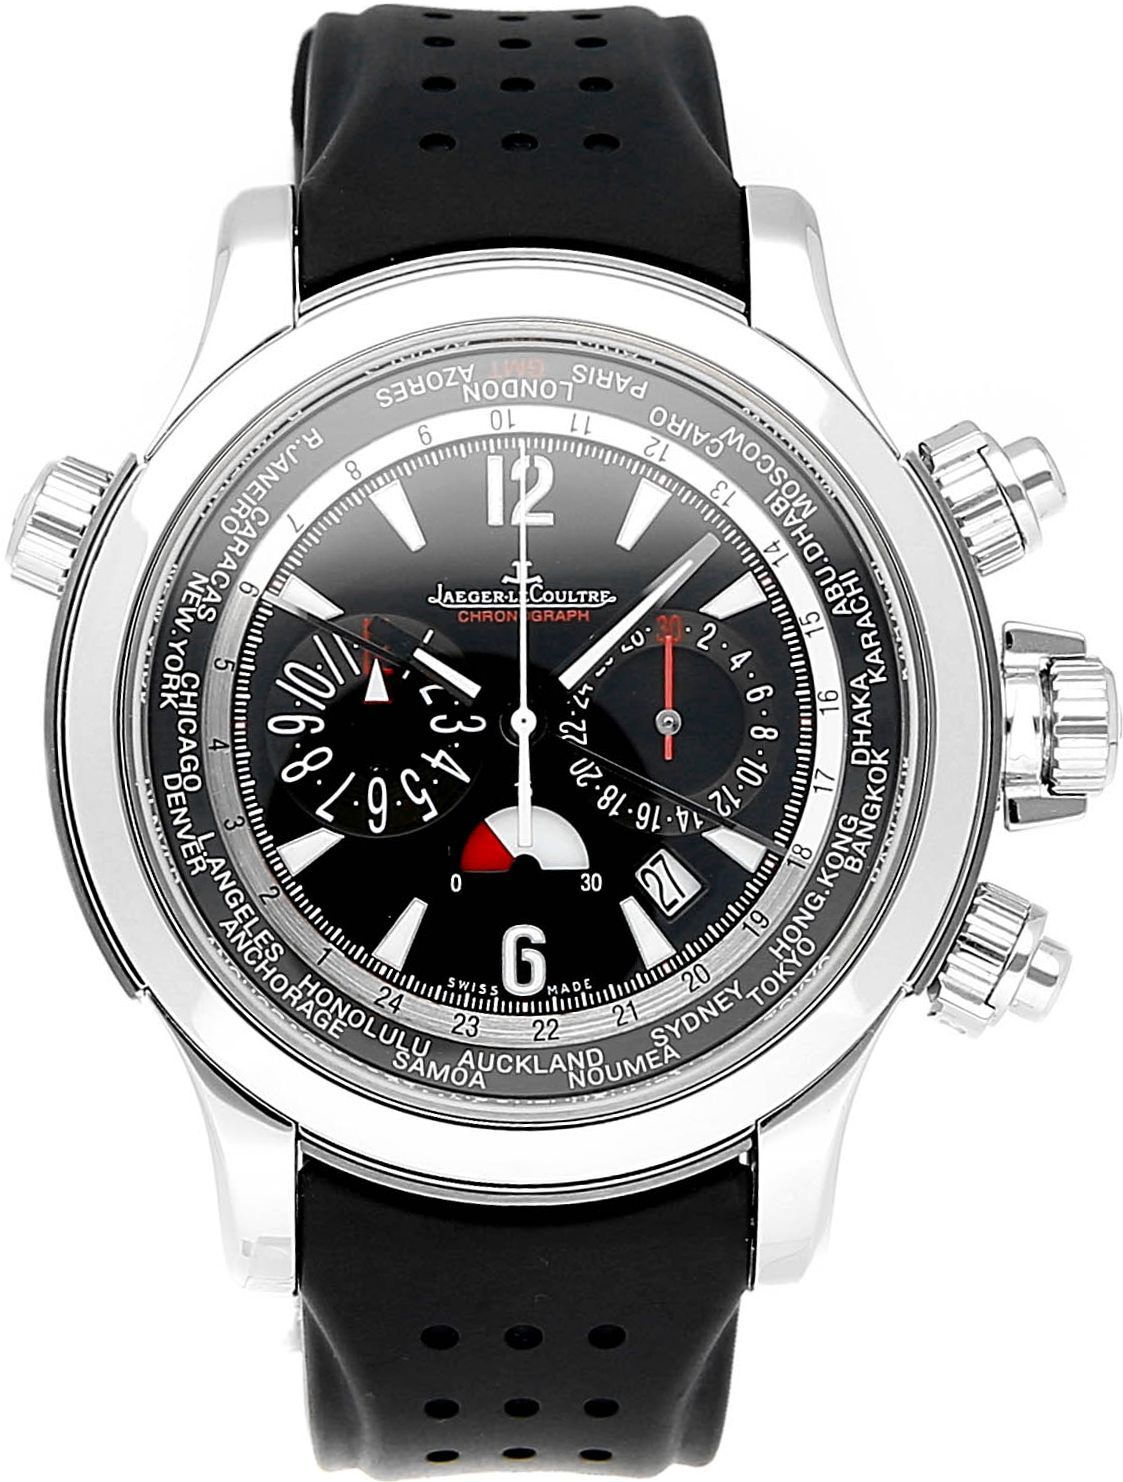 Jaeger-LeCoultre Master Master Compressor Extreme World Chronograph Black Dial 46 mm Automatic Watch For Men - 1